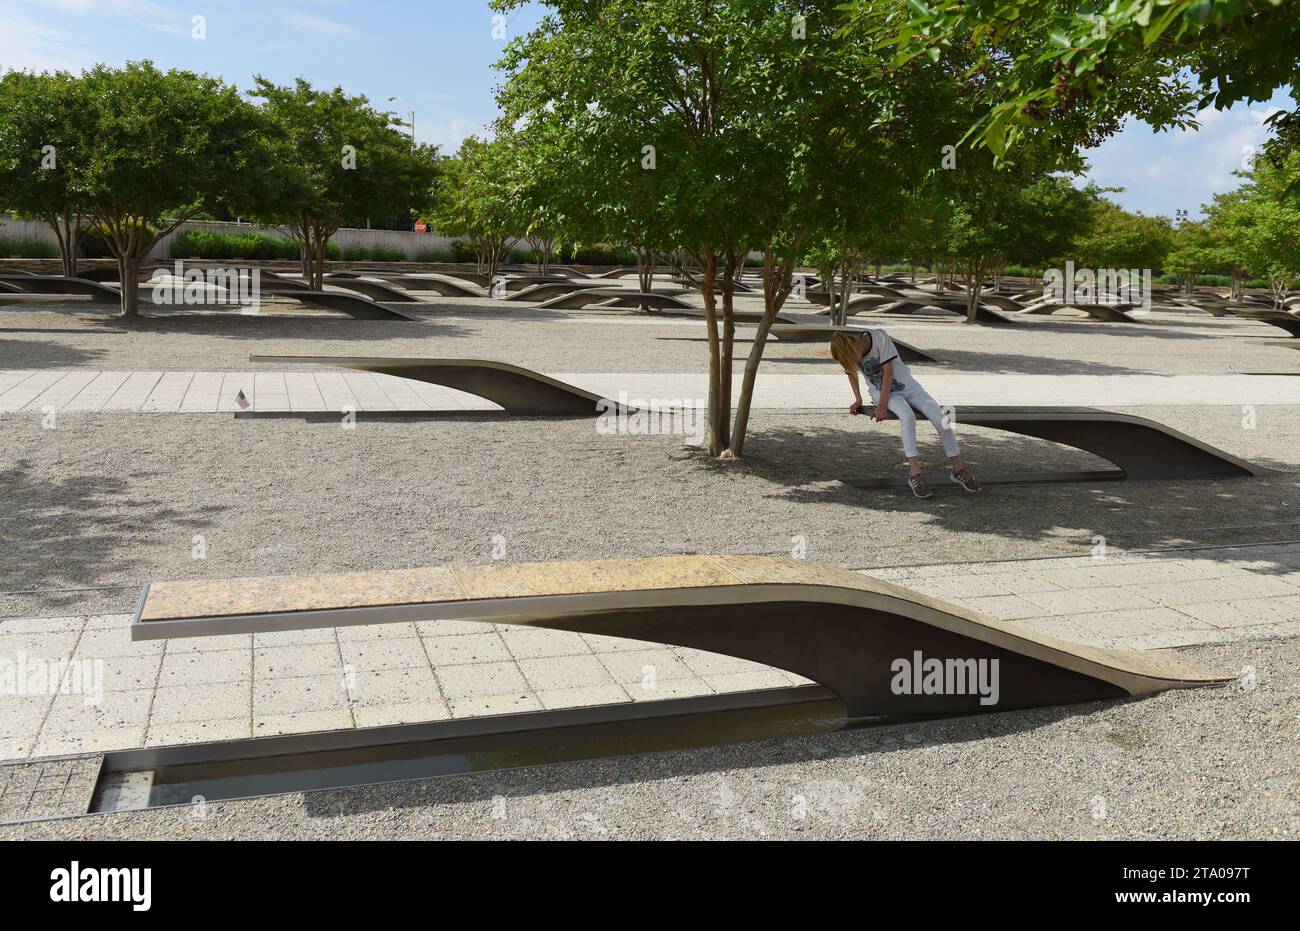 Washington, DC - June 01, 2018: People in the Pentagon Memorial dedicated to the victims of the September 11, 2001 attack. Stock Photo